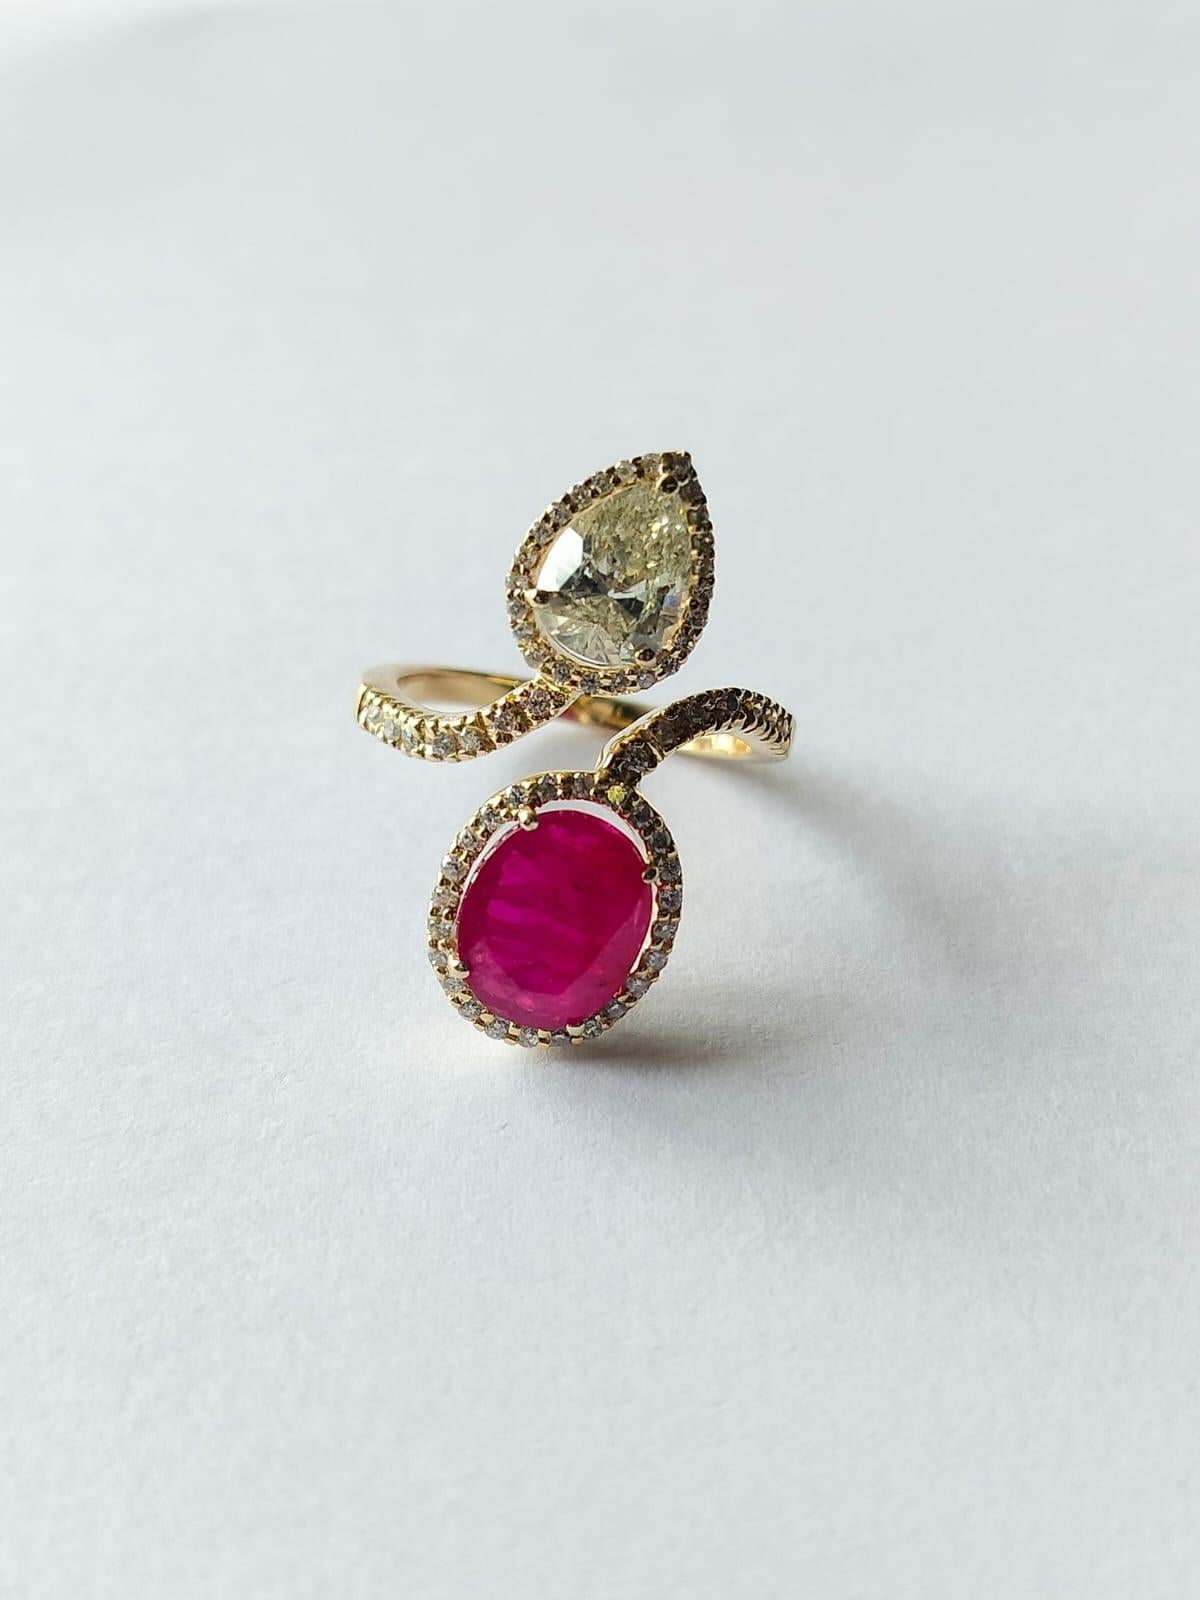 A very gorgeous and beautiful, Ruby Engagement Ring set in 18K Gold & Diamonds. The weight of the Ruby is  2.76 carats. The oval Ruby is completely natural, without any treatment and is of Mozambique origin. The pear shaped diamond weight is 0.93